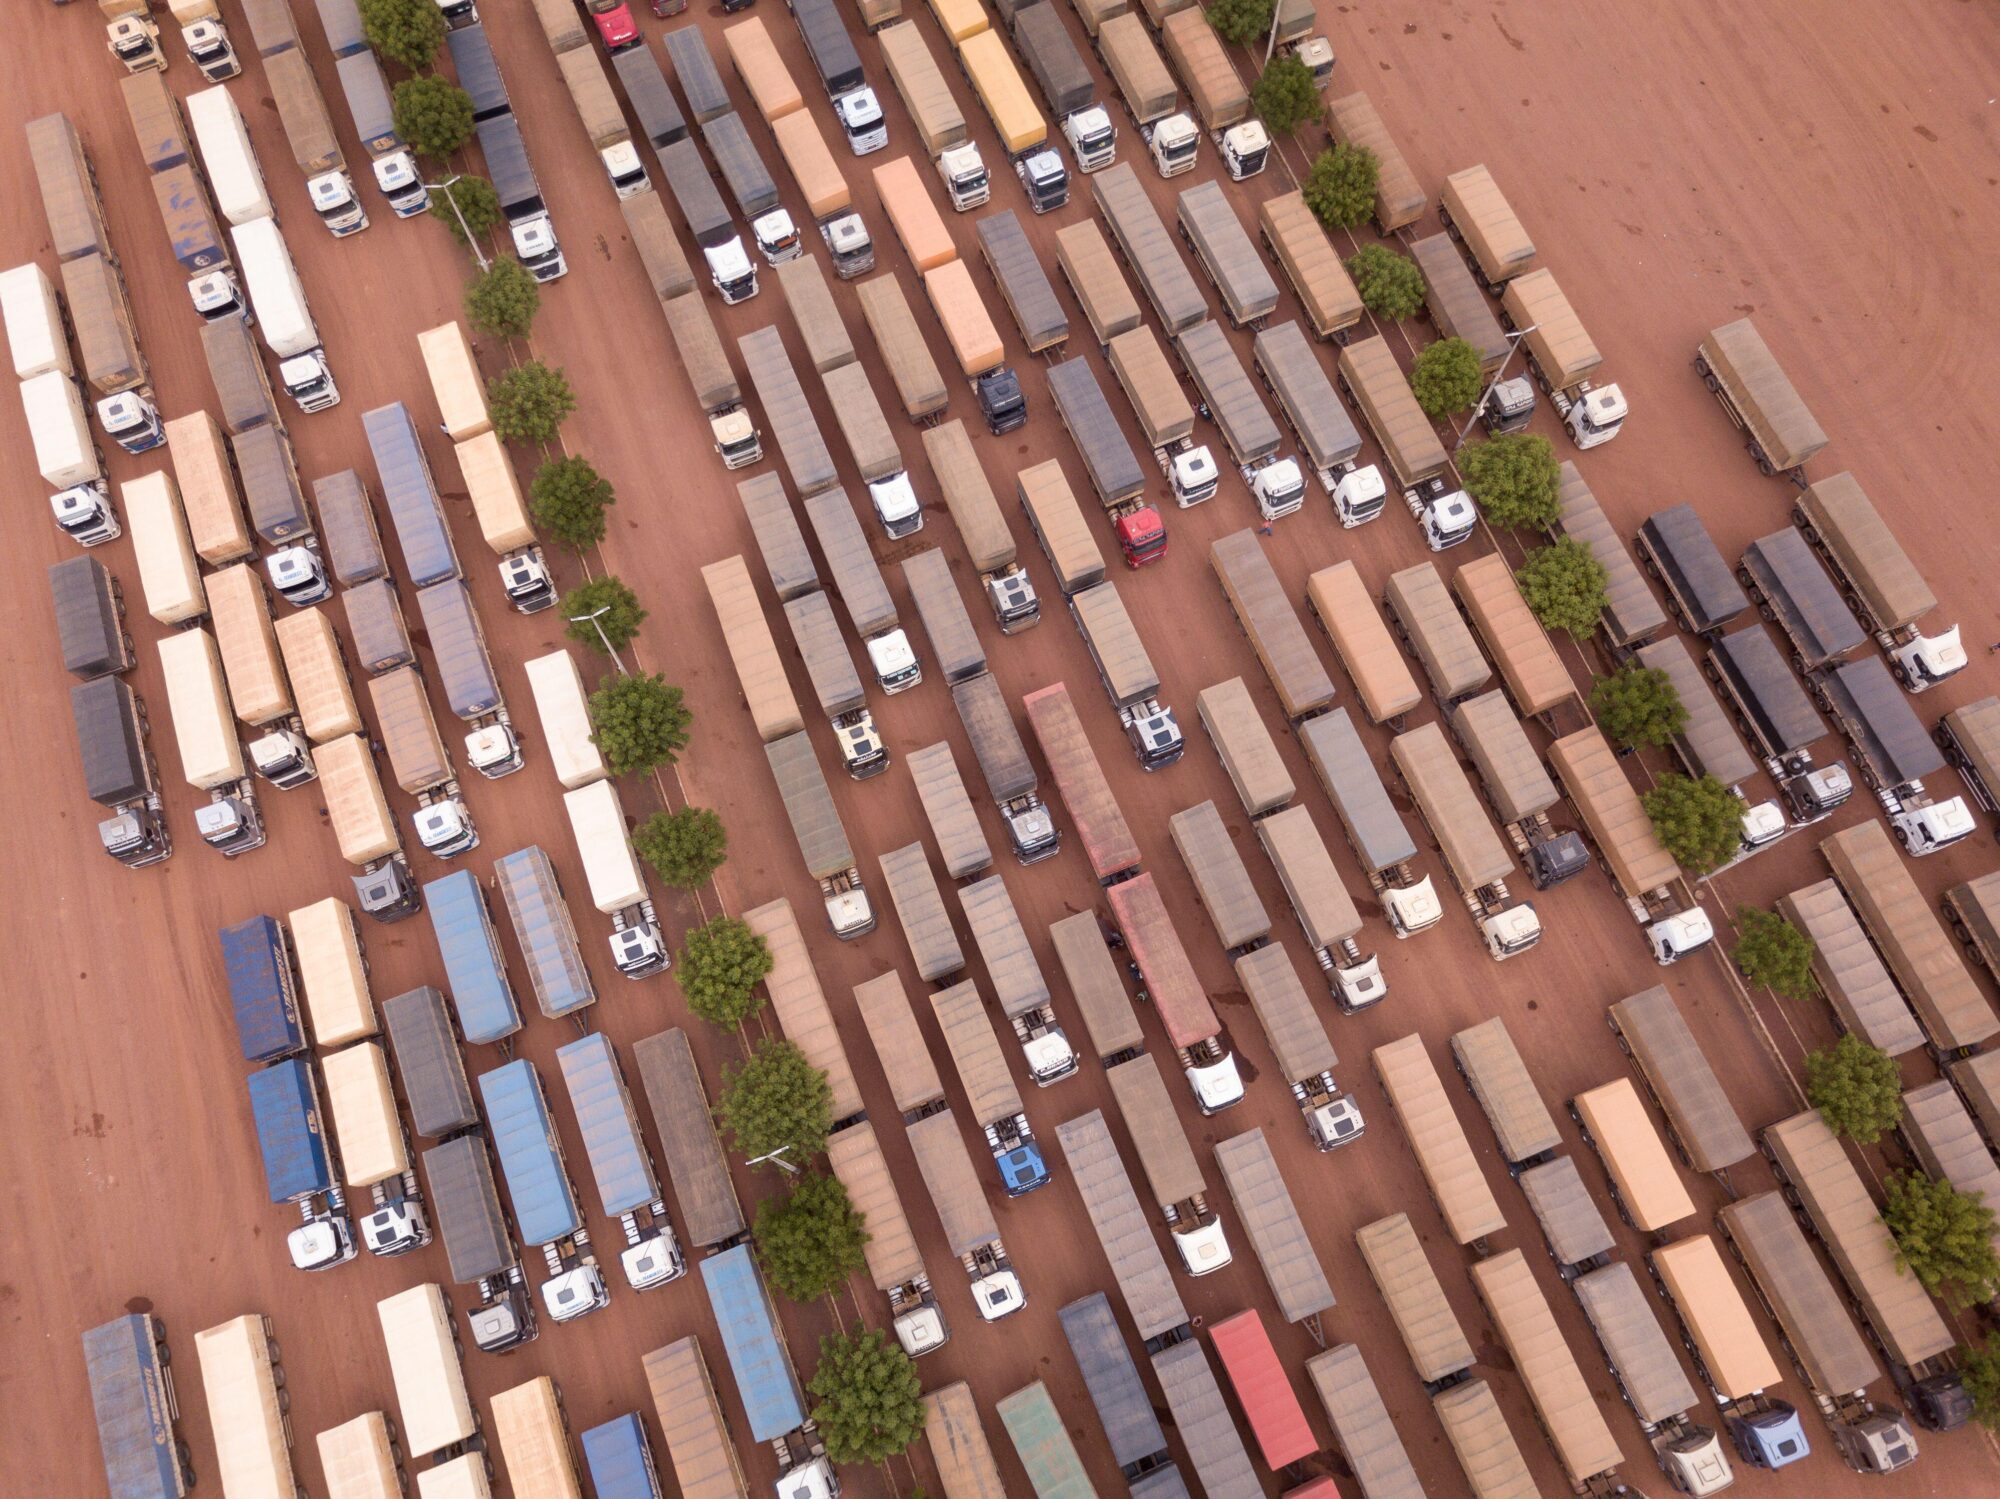 aerial view of lorries queuing